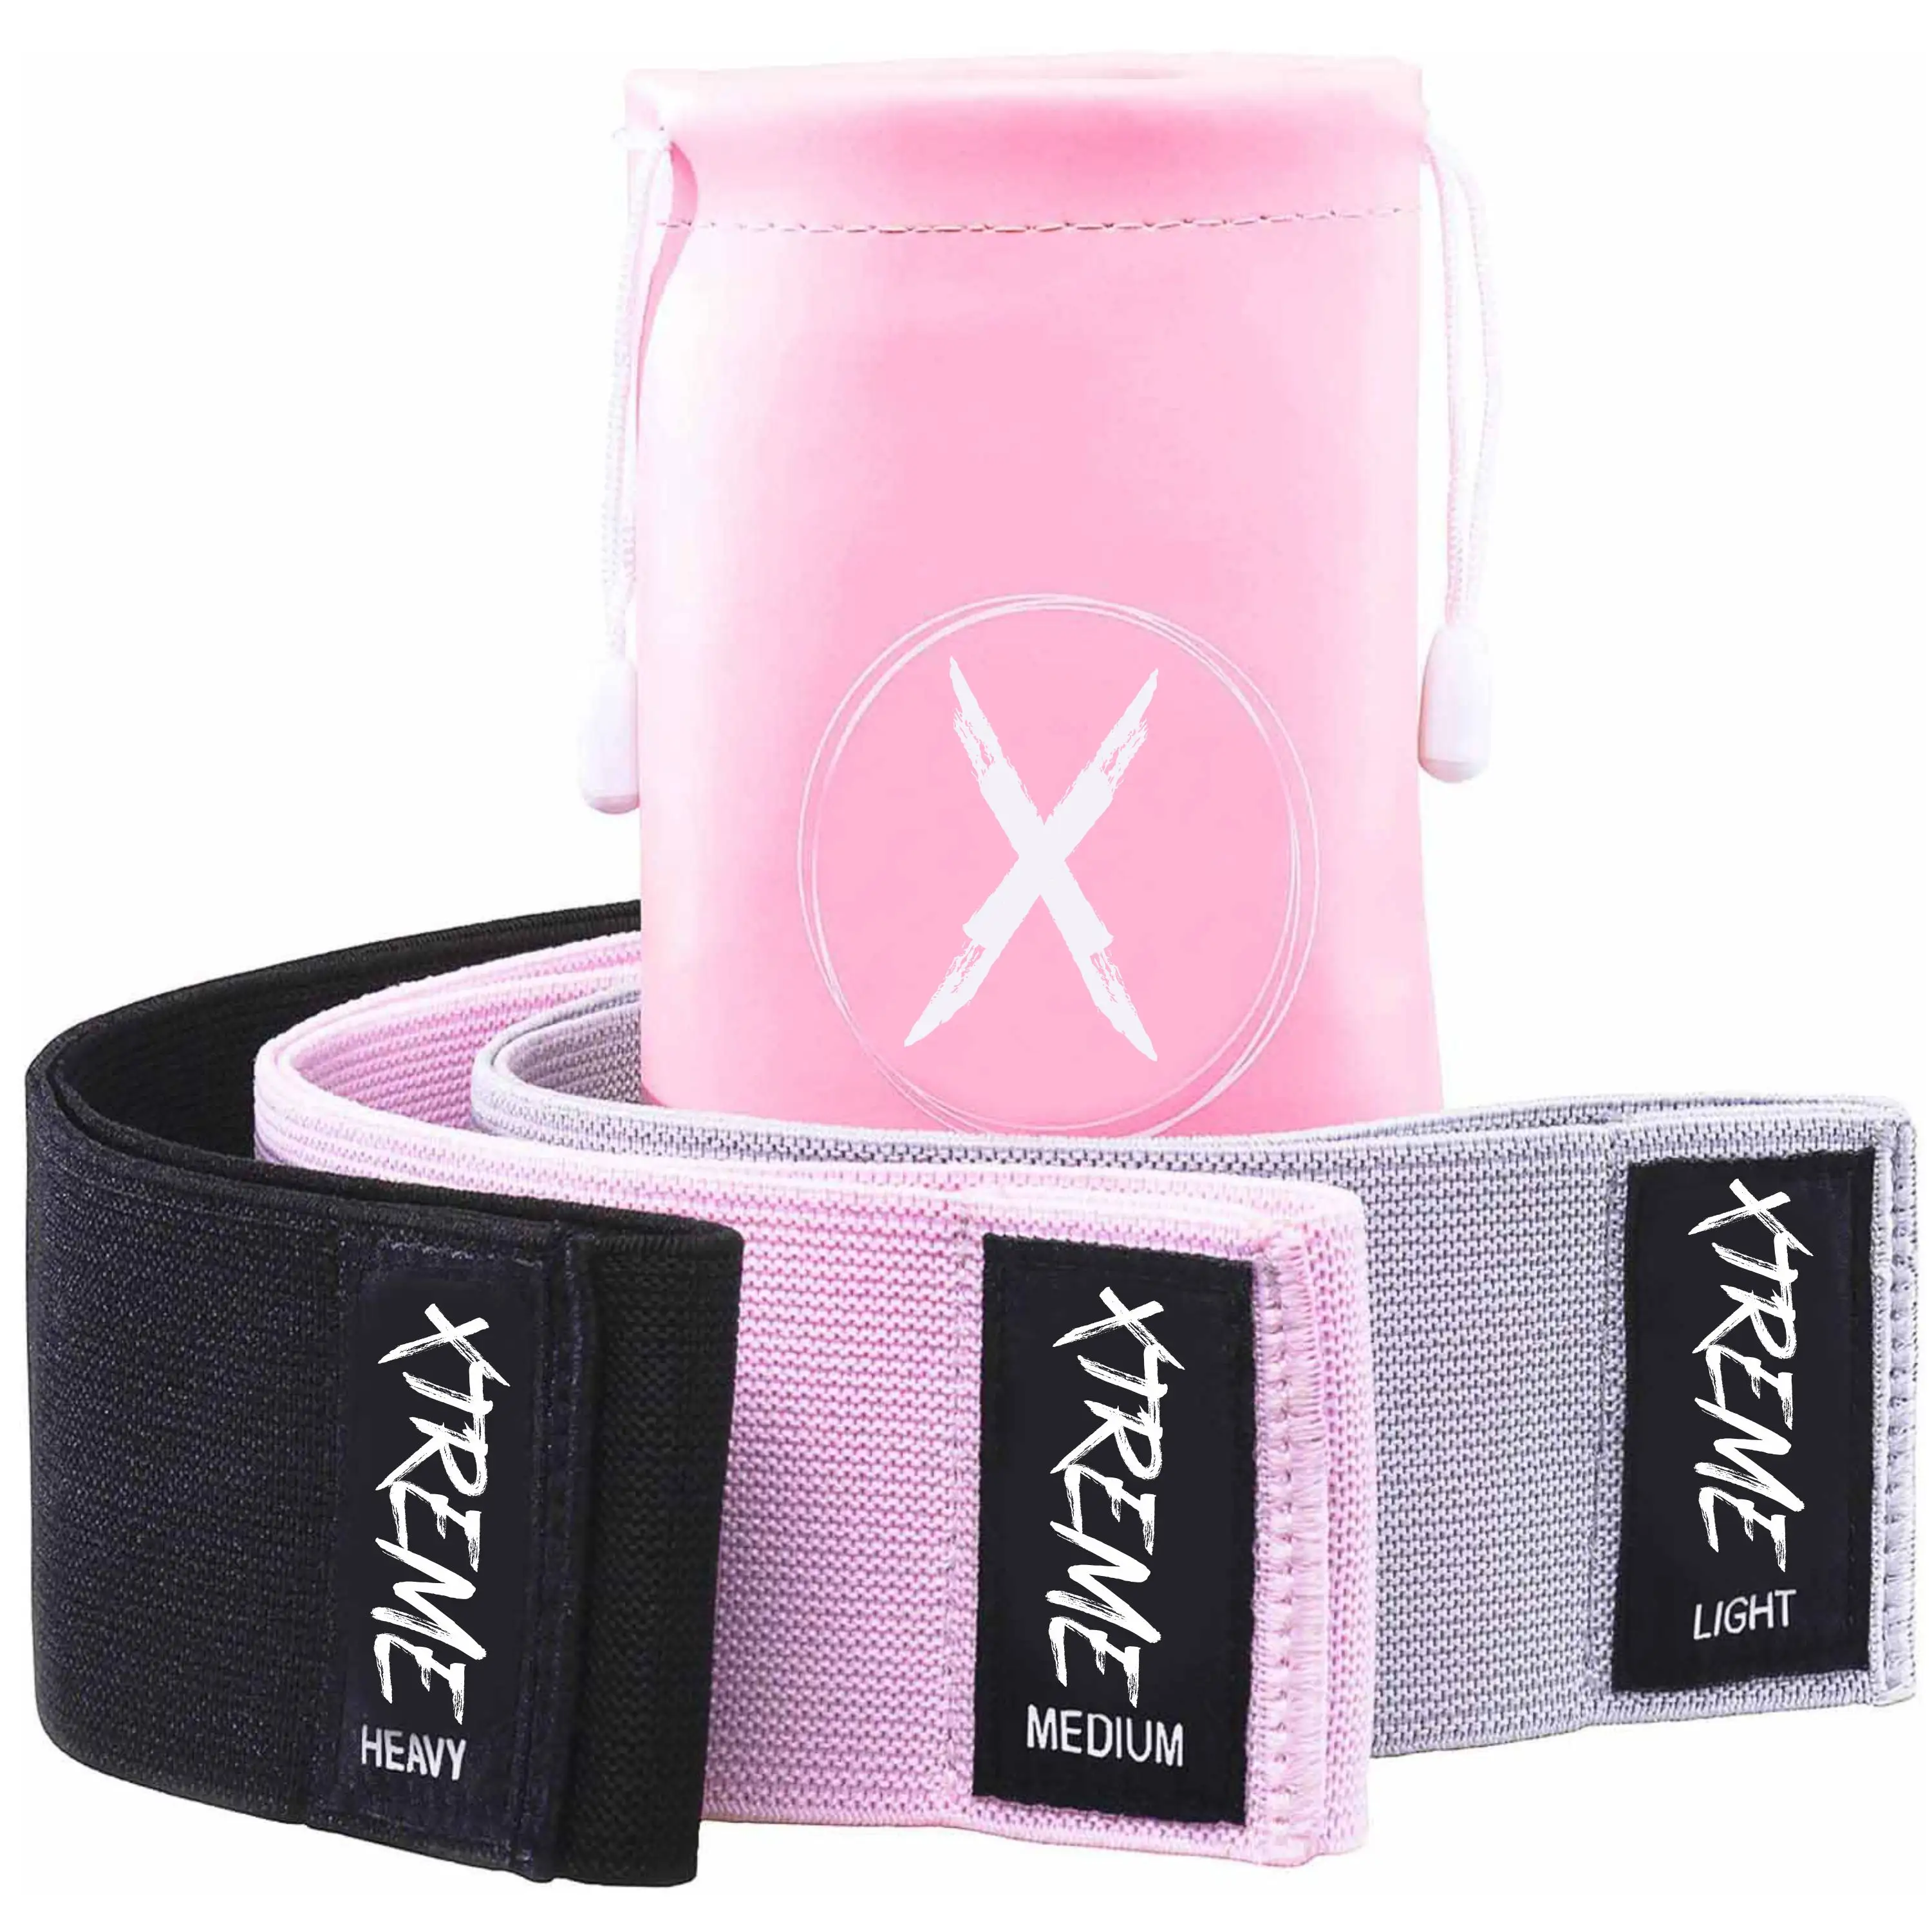 Booty Exercise band warm up strength training hip band Peach athletics cloth thick wide rubber grippy butt booty band